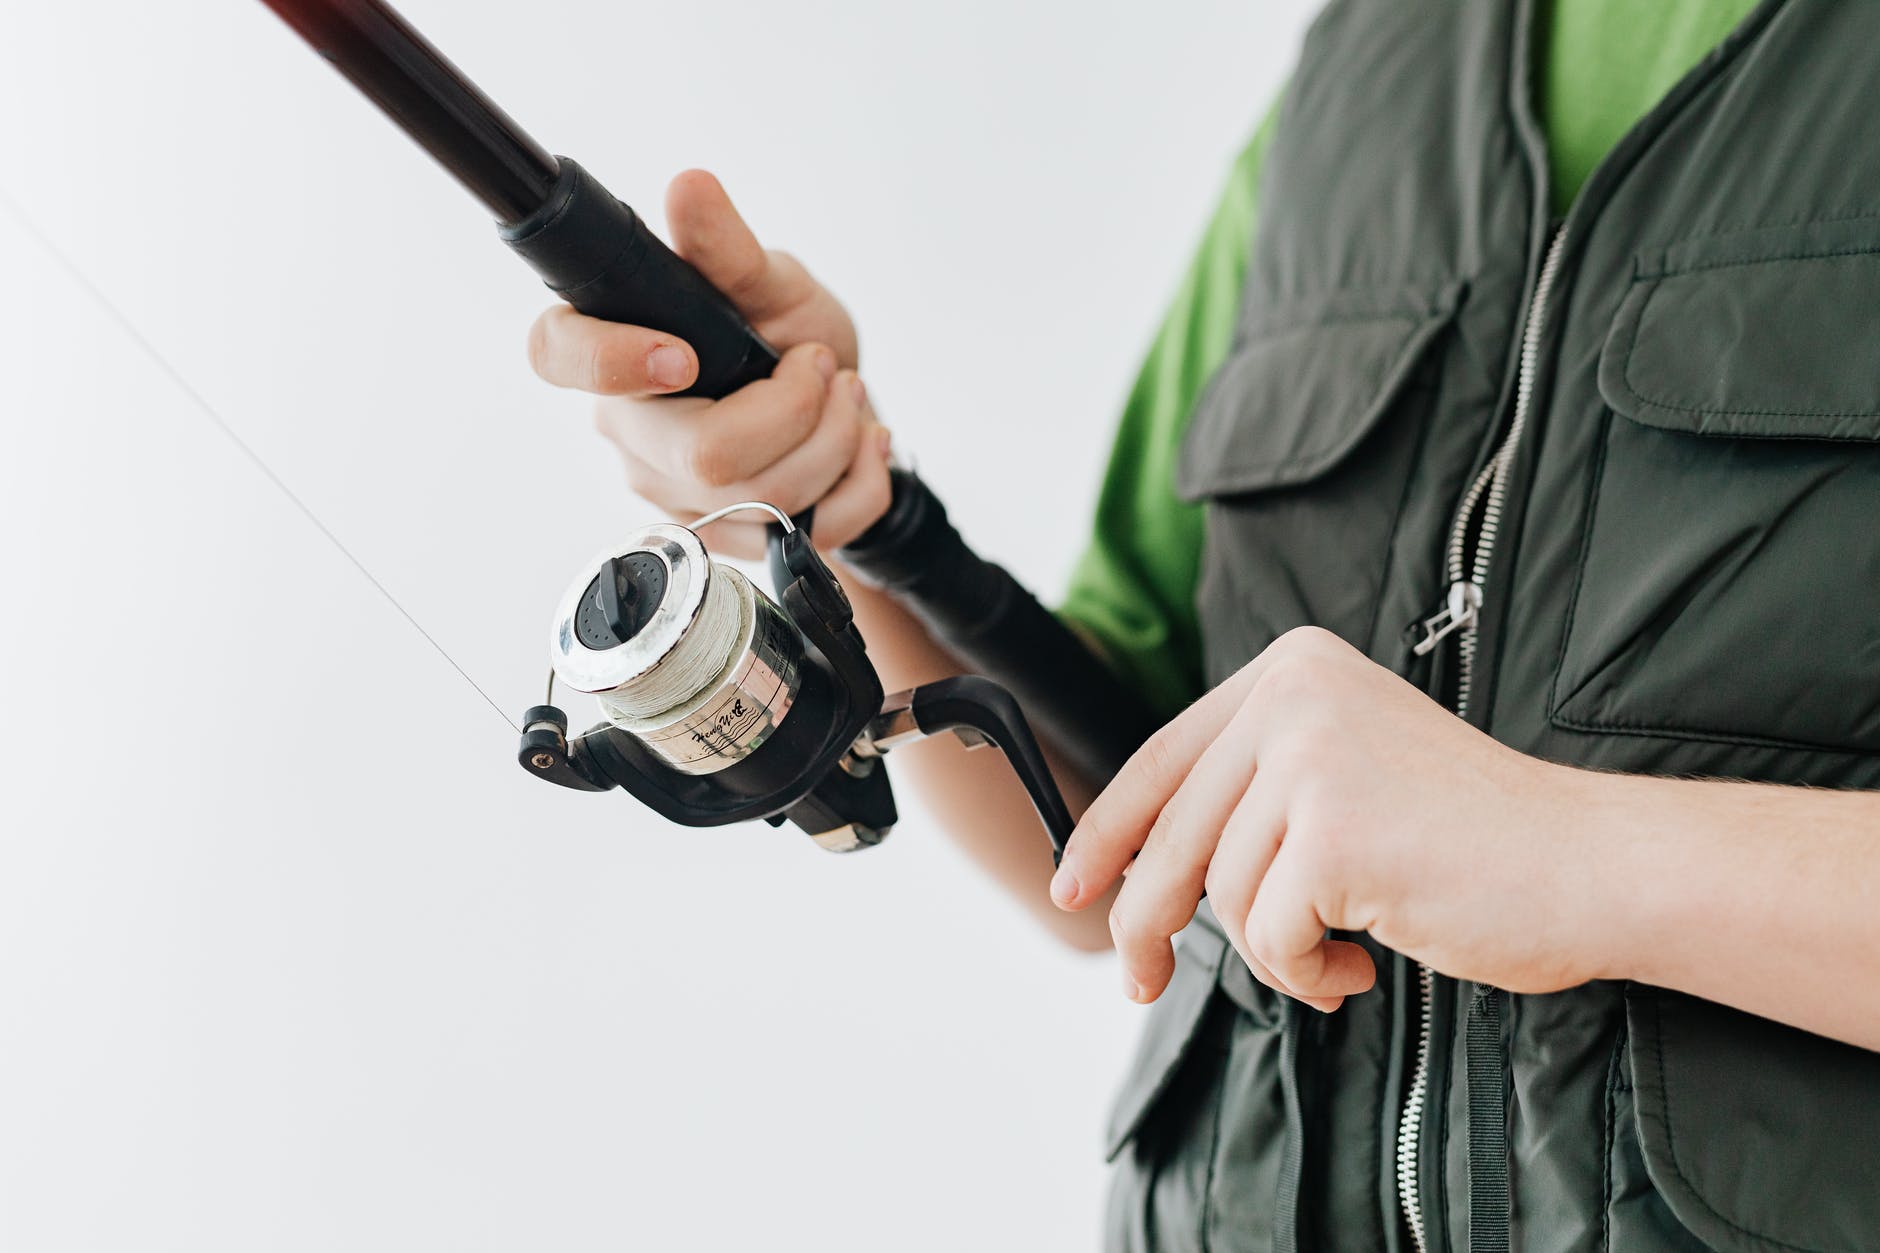 The Best Fishing Subscription Box for Your Needs